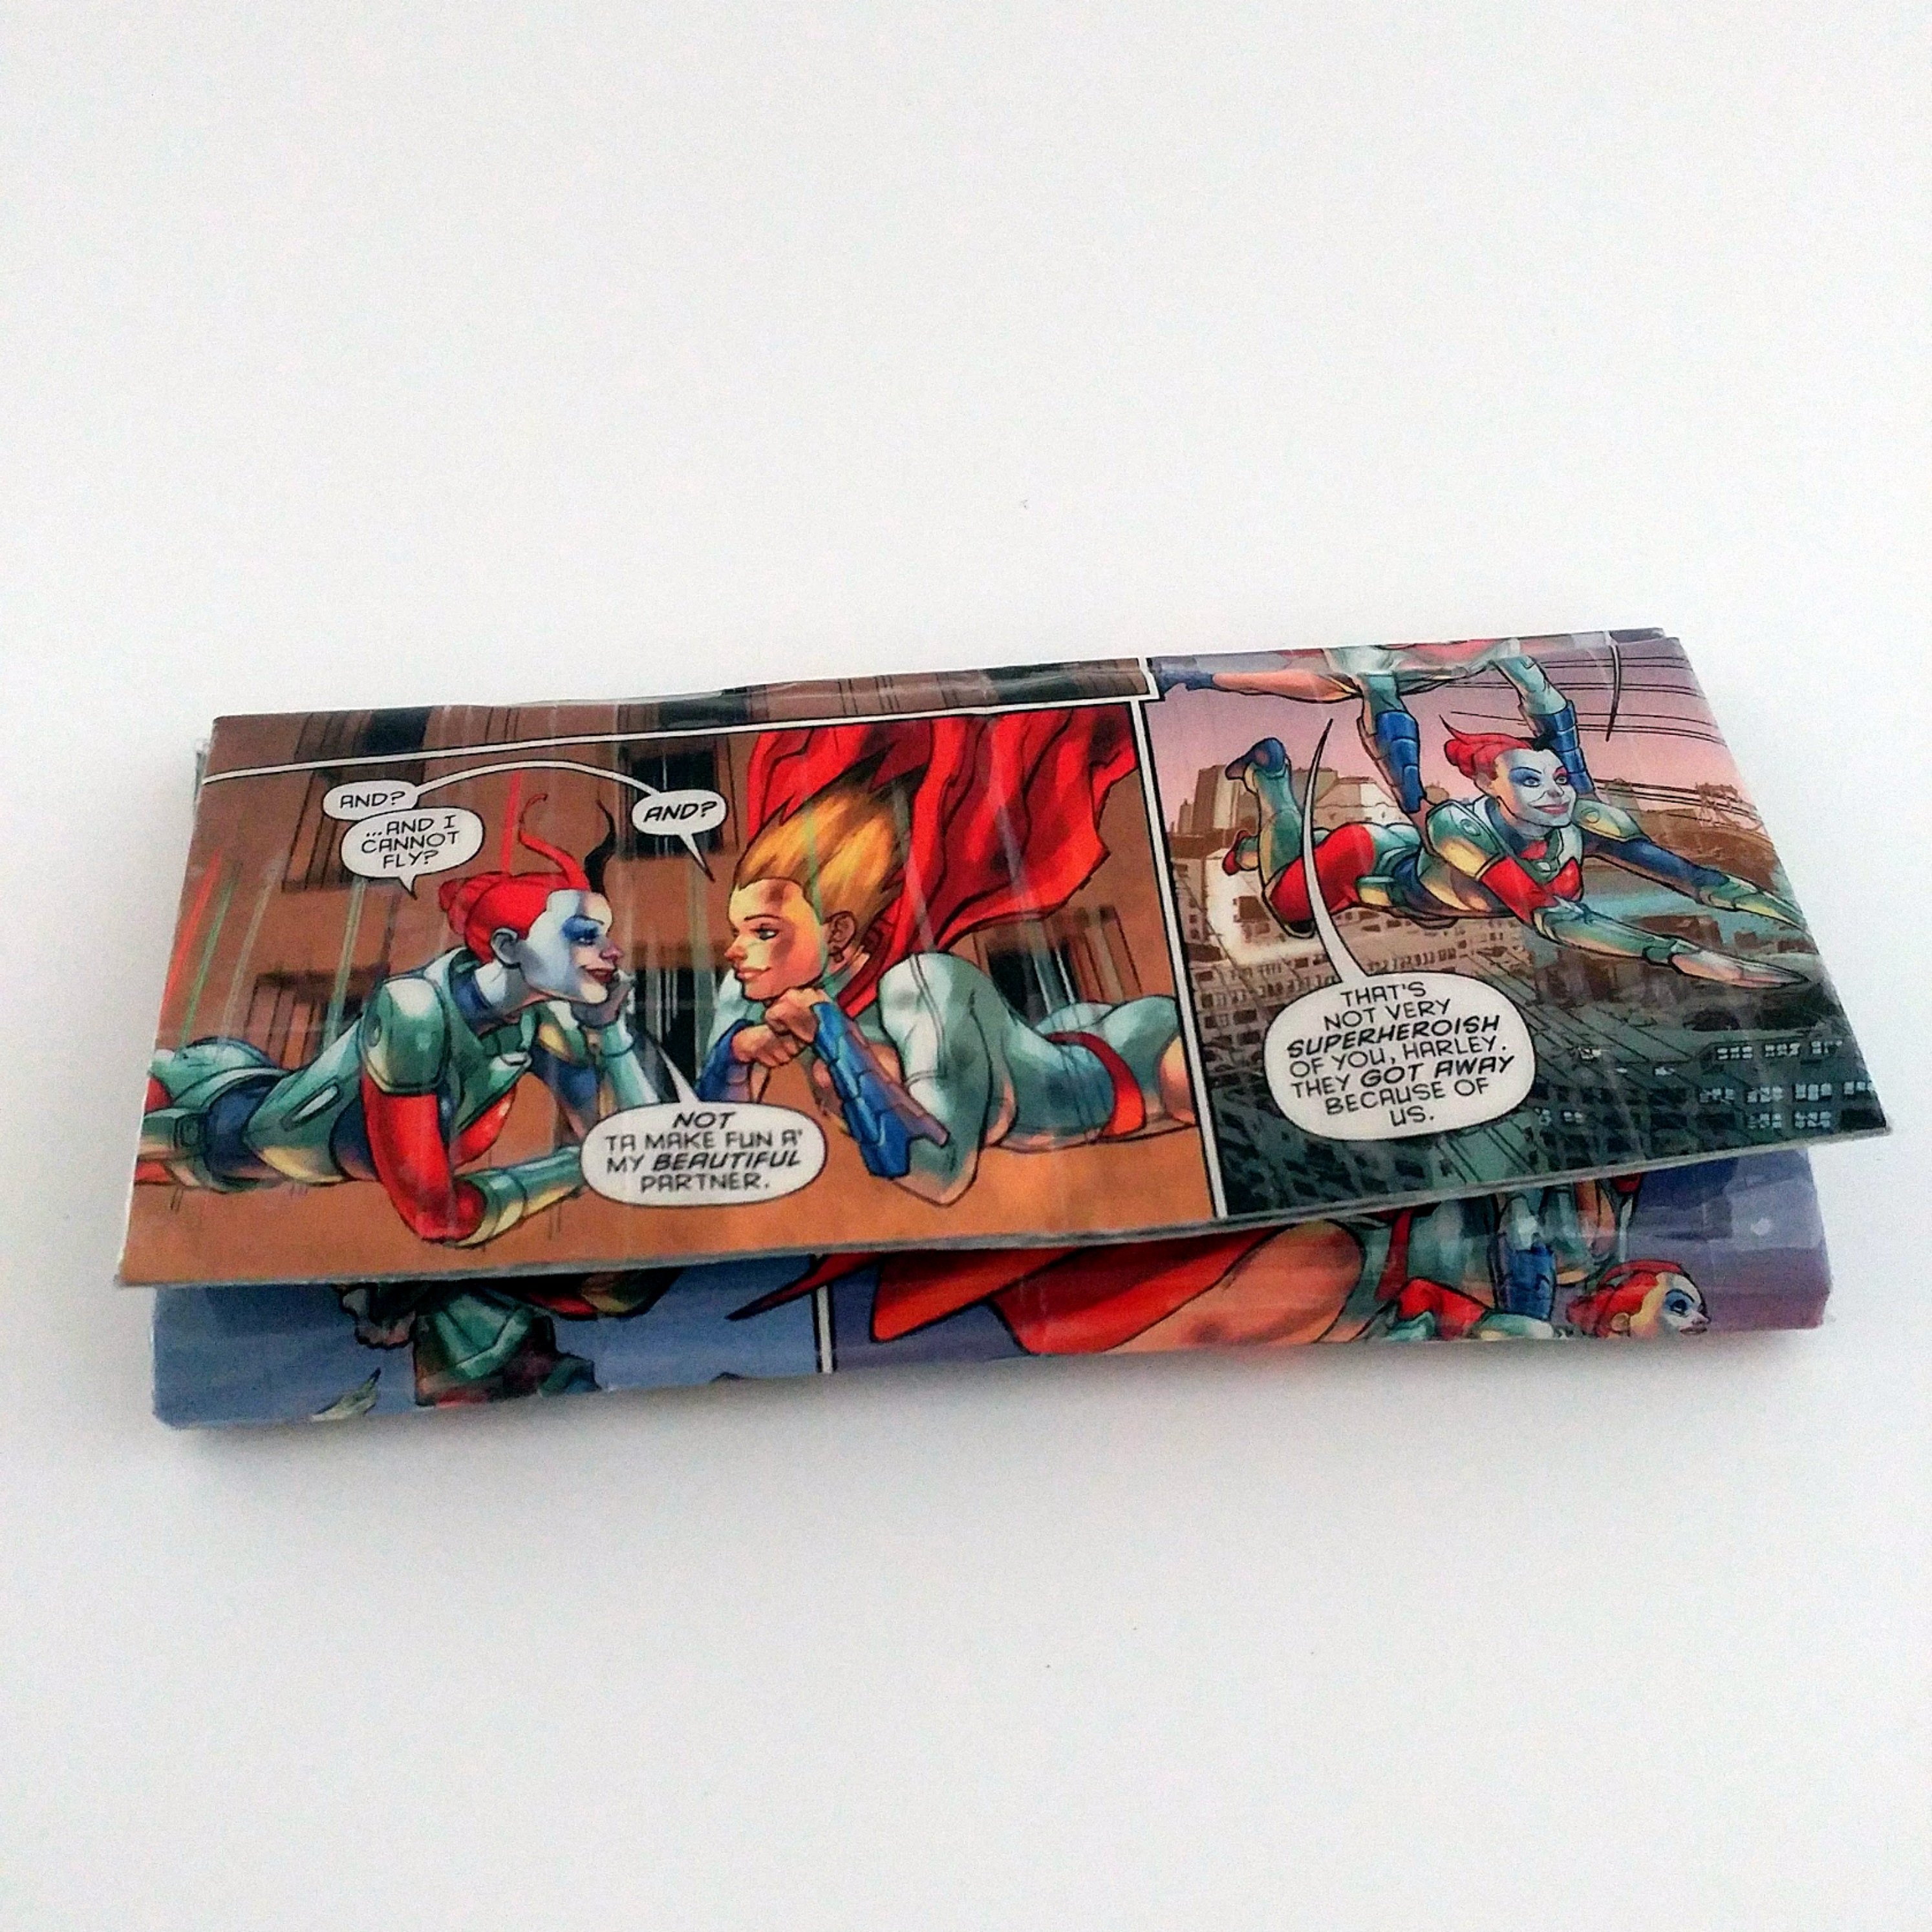 Harley Quinn and Power Girl wallet made from an upcycled Harley Quinn comic book.